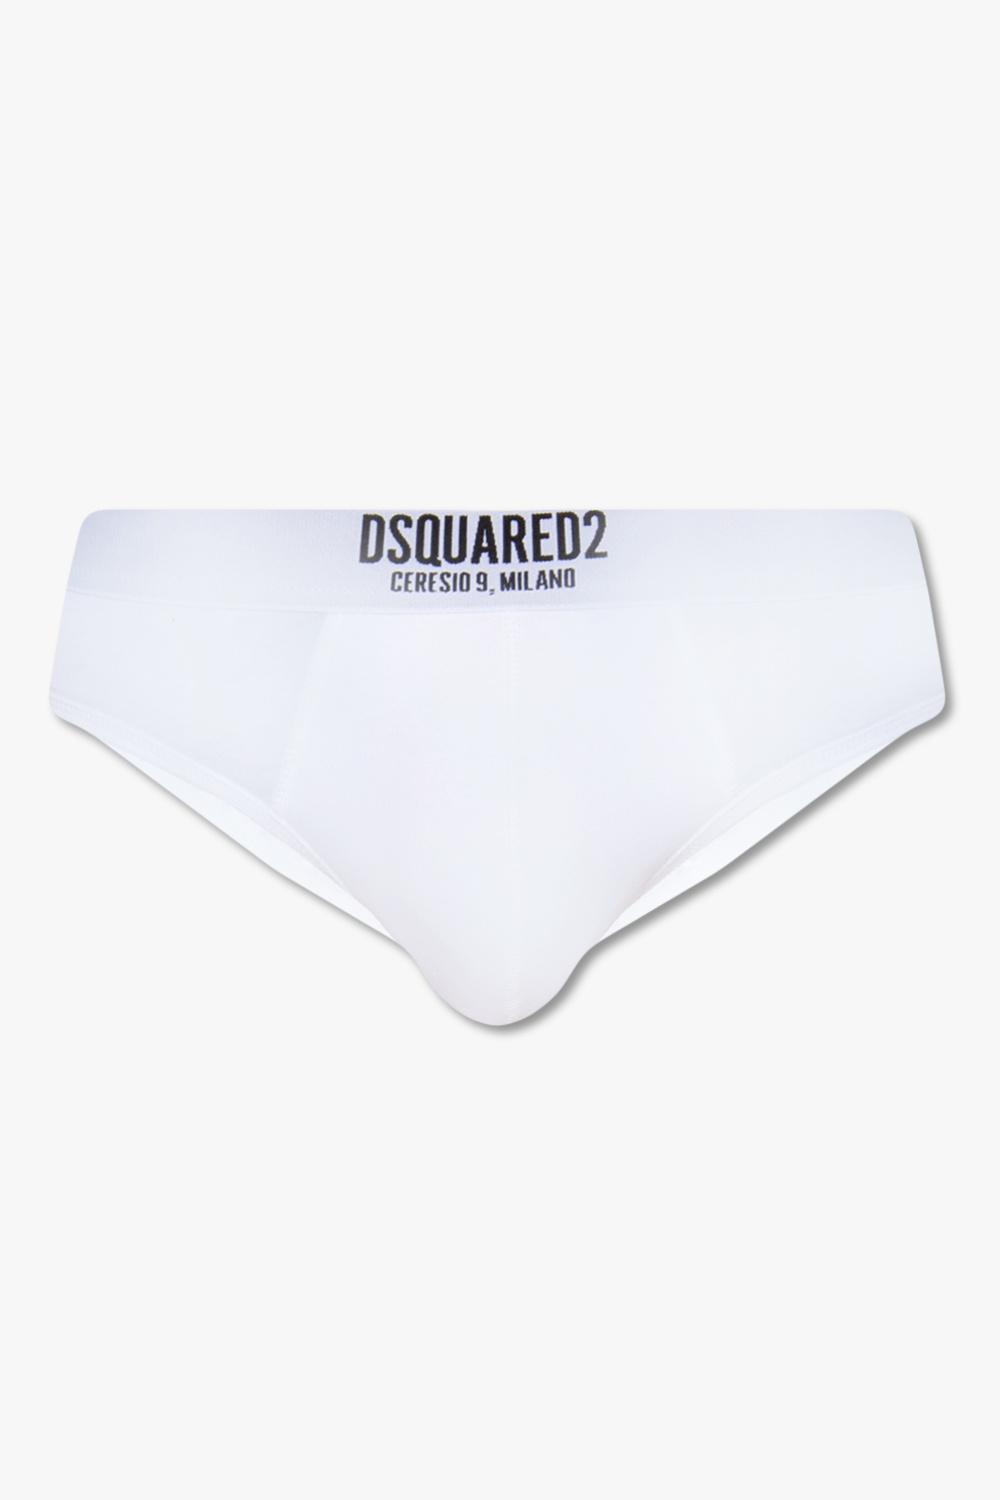 Dsquared2 Discover the most desirable